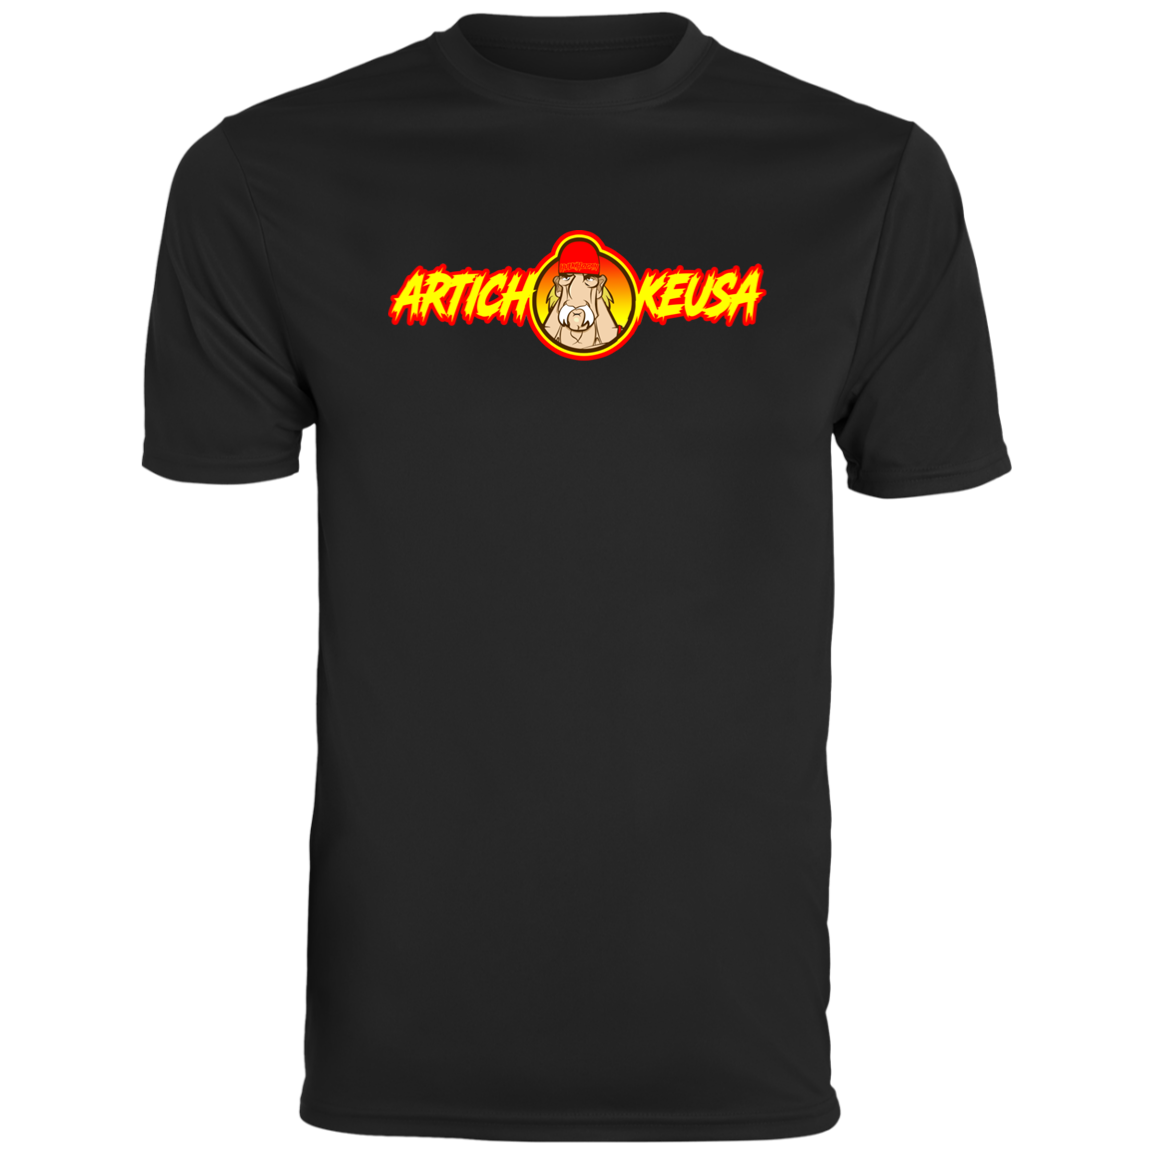 ArtichokeUSA Character and Font Design. Let’s Create Your Own Design Today. Fan Art. The Hulkster. Men's Moisture-Wicking Tee